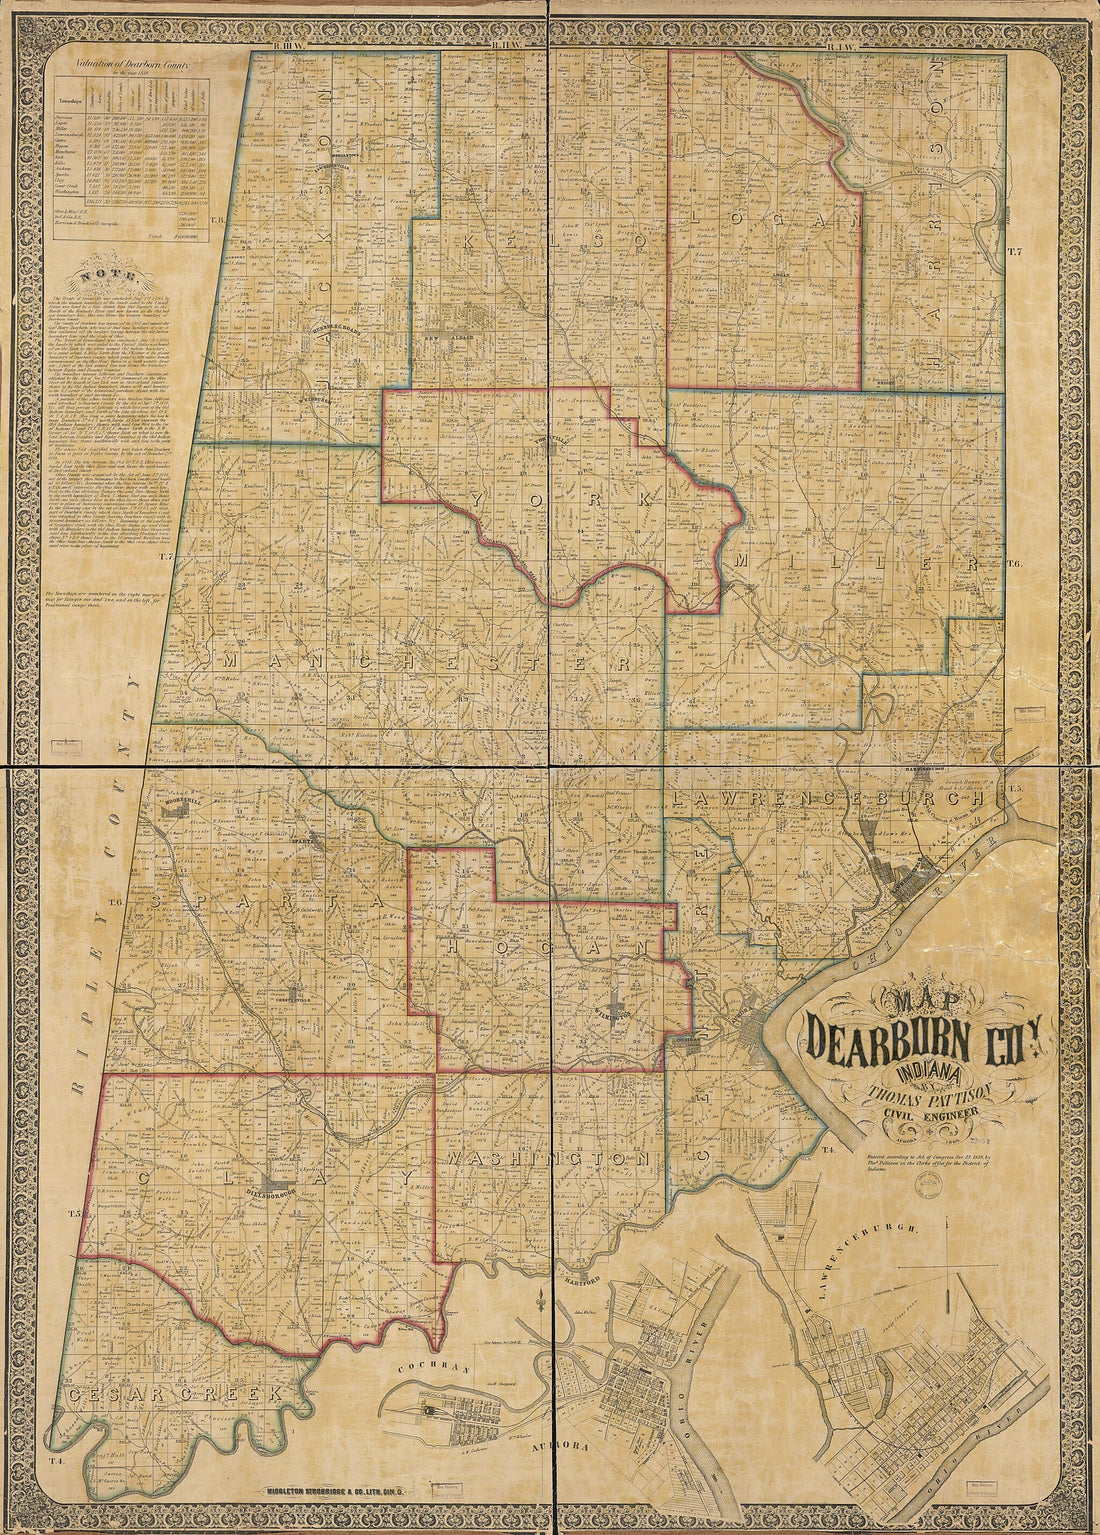 This old map of Map of Dearborn Coy., Indiana from 1860 was created by Thomas Pattison in 1860